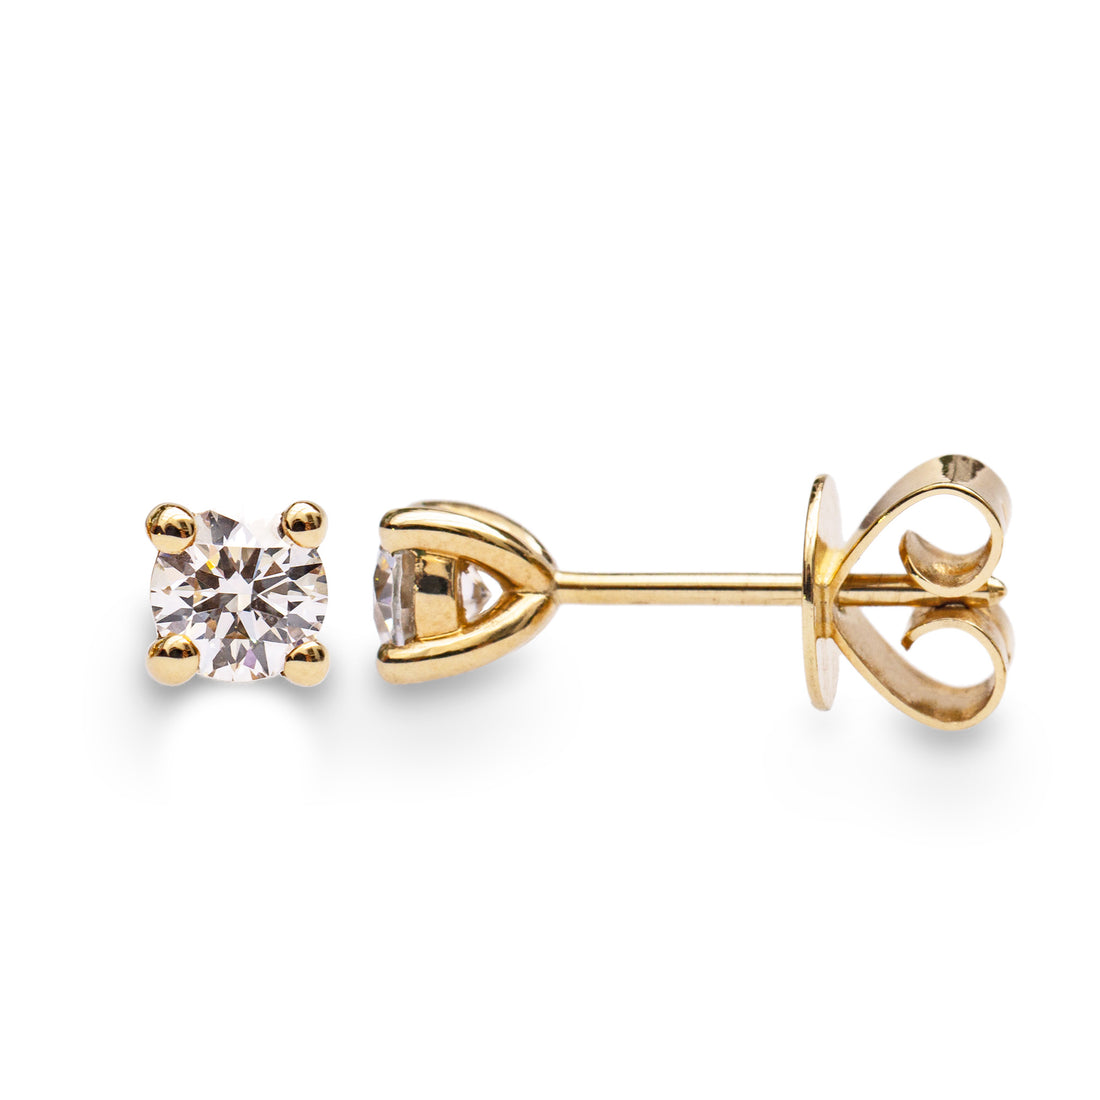 round brilliant cut diamond stud earring with solid gold four claw basket setting and heavy backs